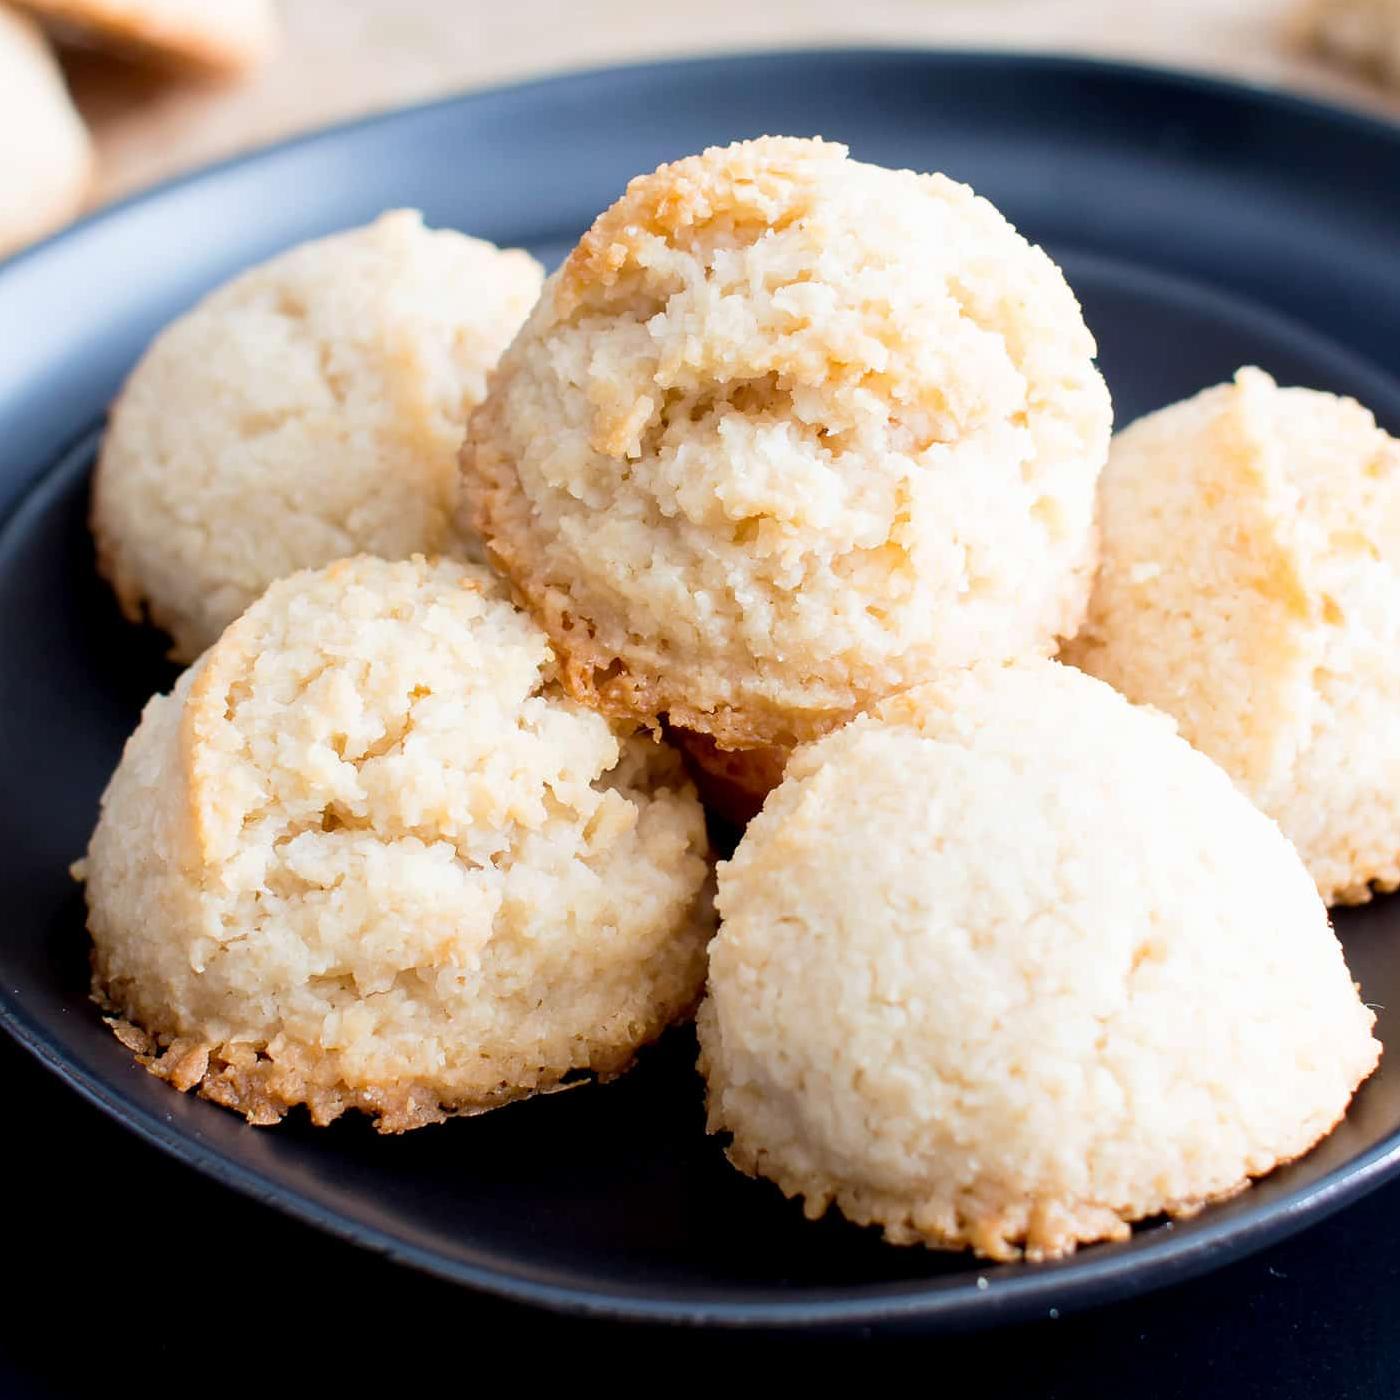  These macaroons are crispy on the outside and chewy on the inside, perfect for a sweet treat.